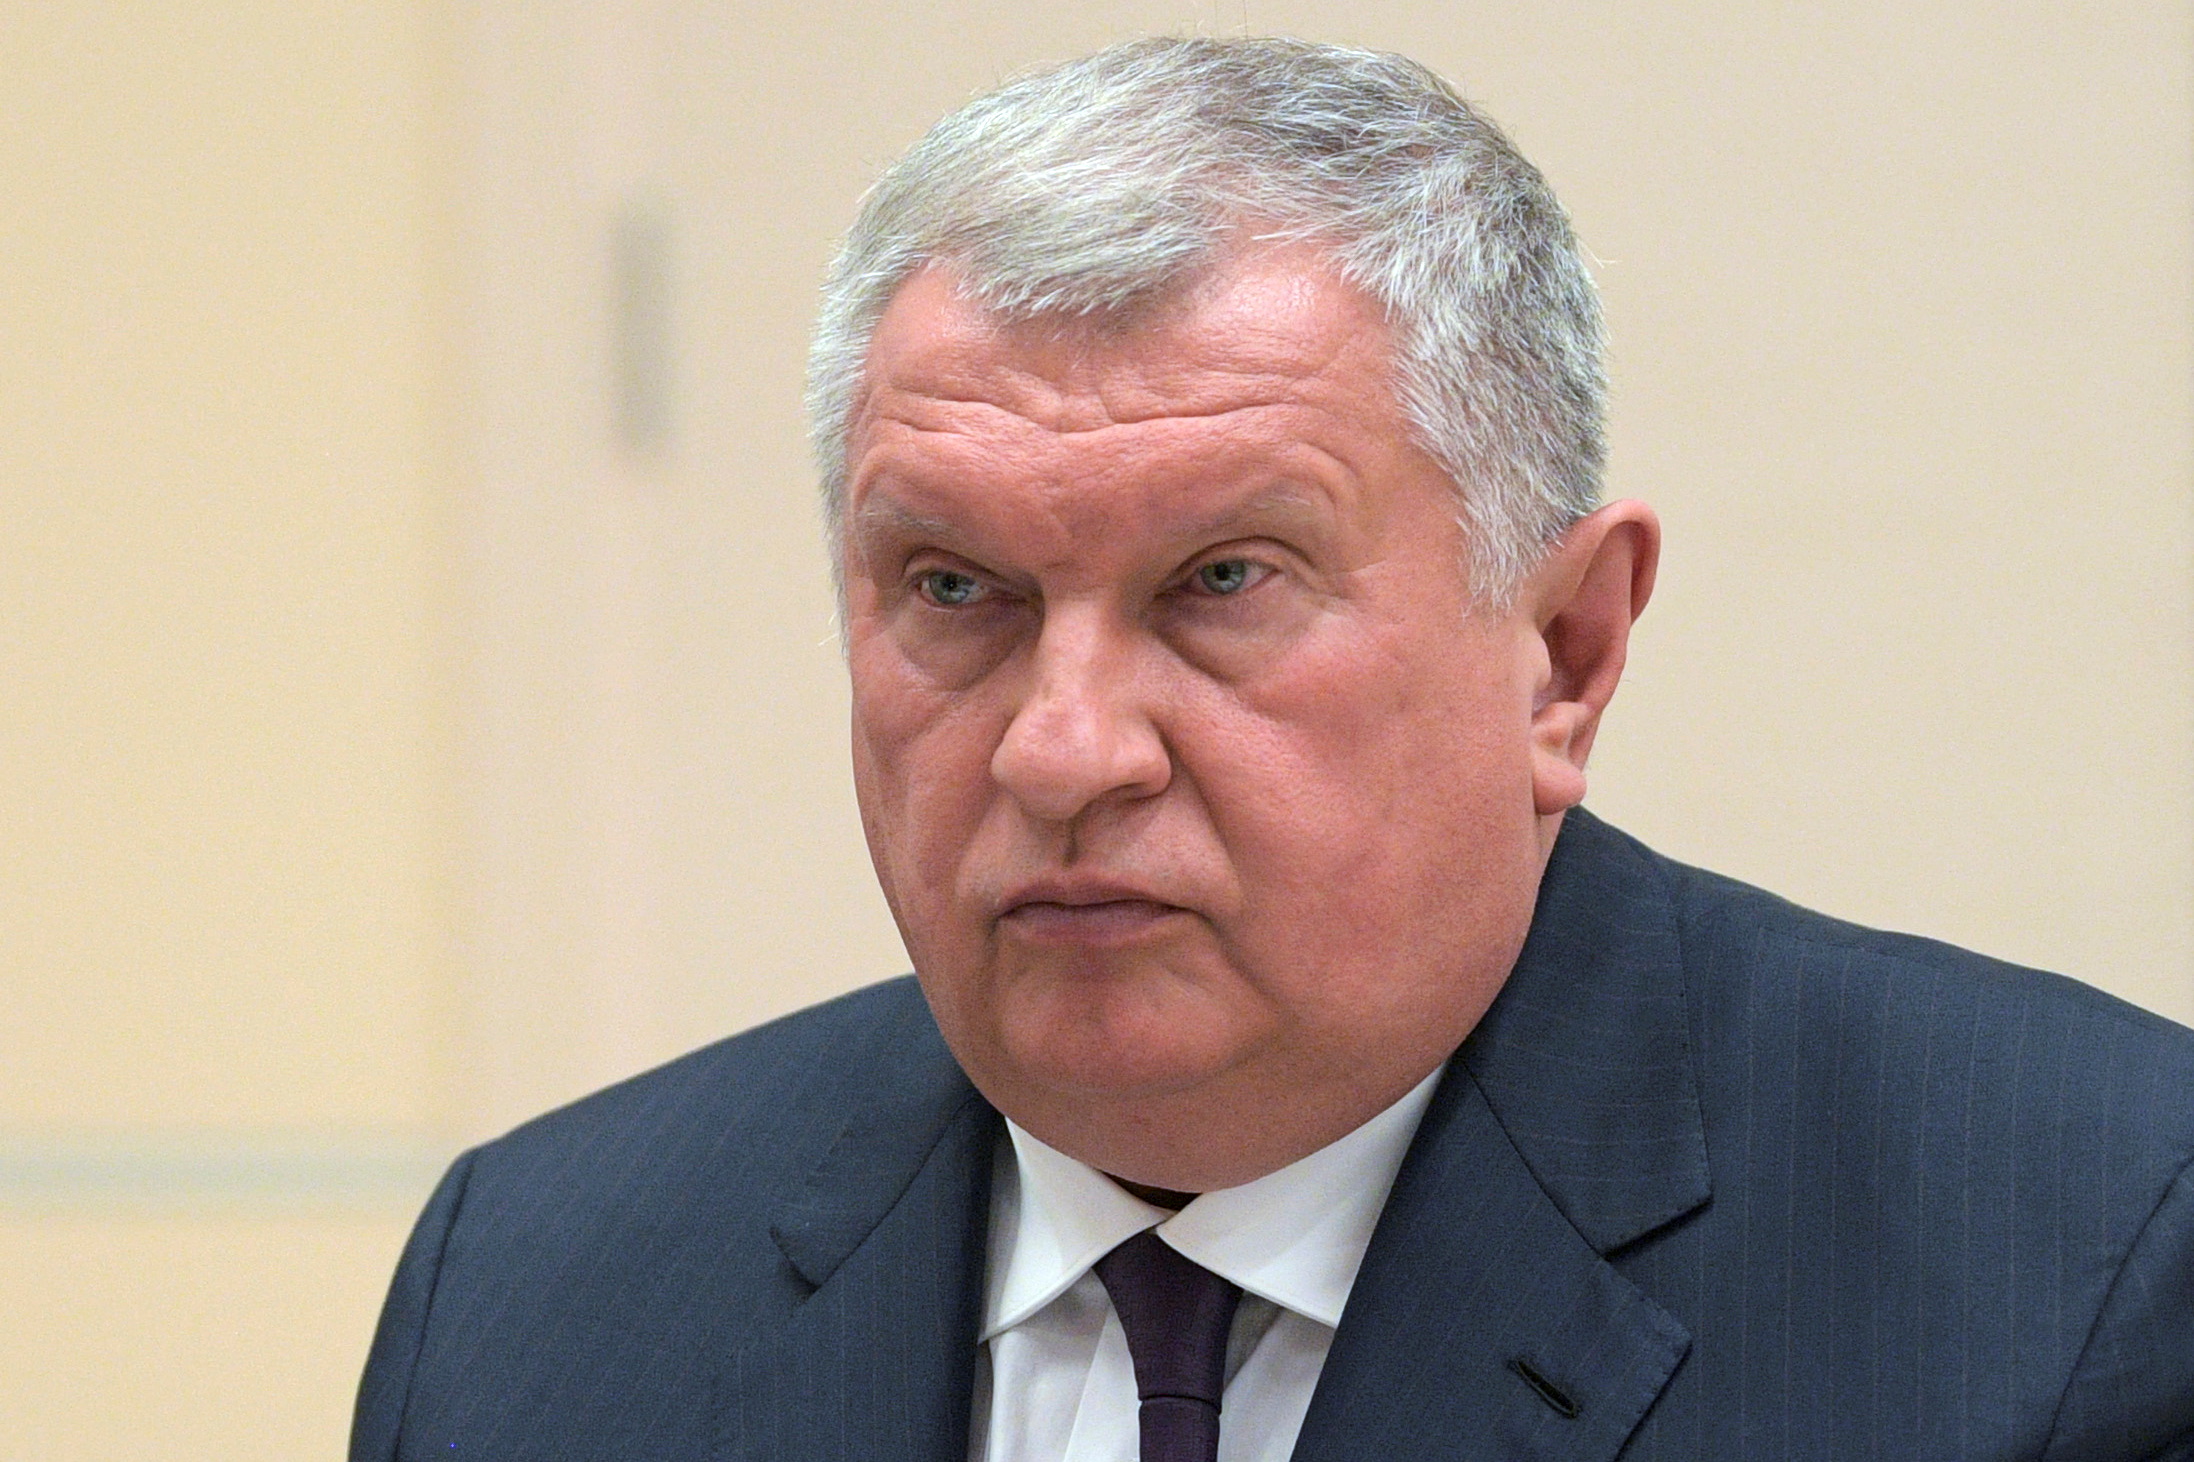 Chief Executive of Rosneft company Igor Sechin attends a meeting with Russian President Vladimir Putin at the Novo-Ogaryovo state residence outside Moscow